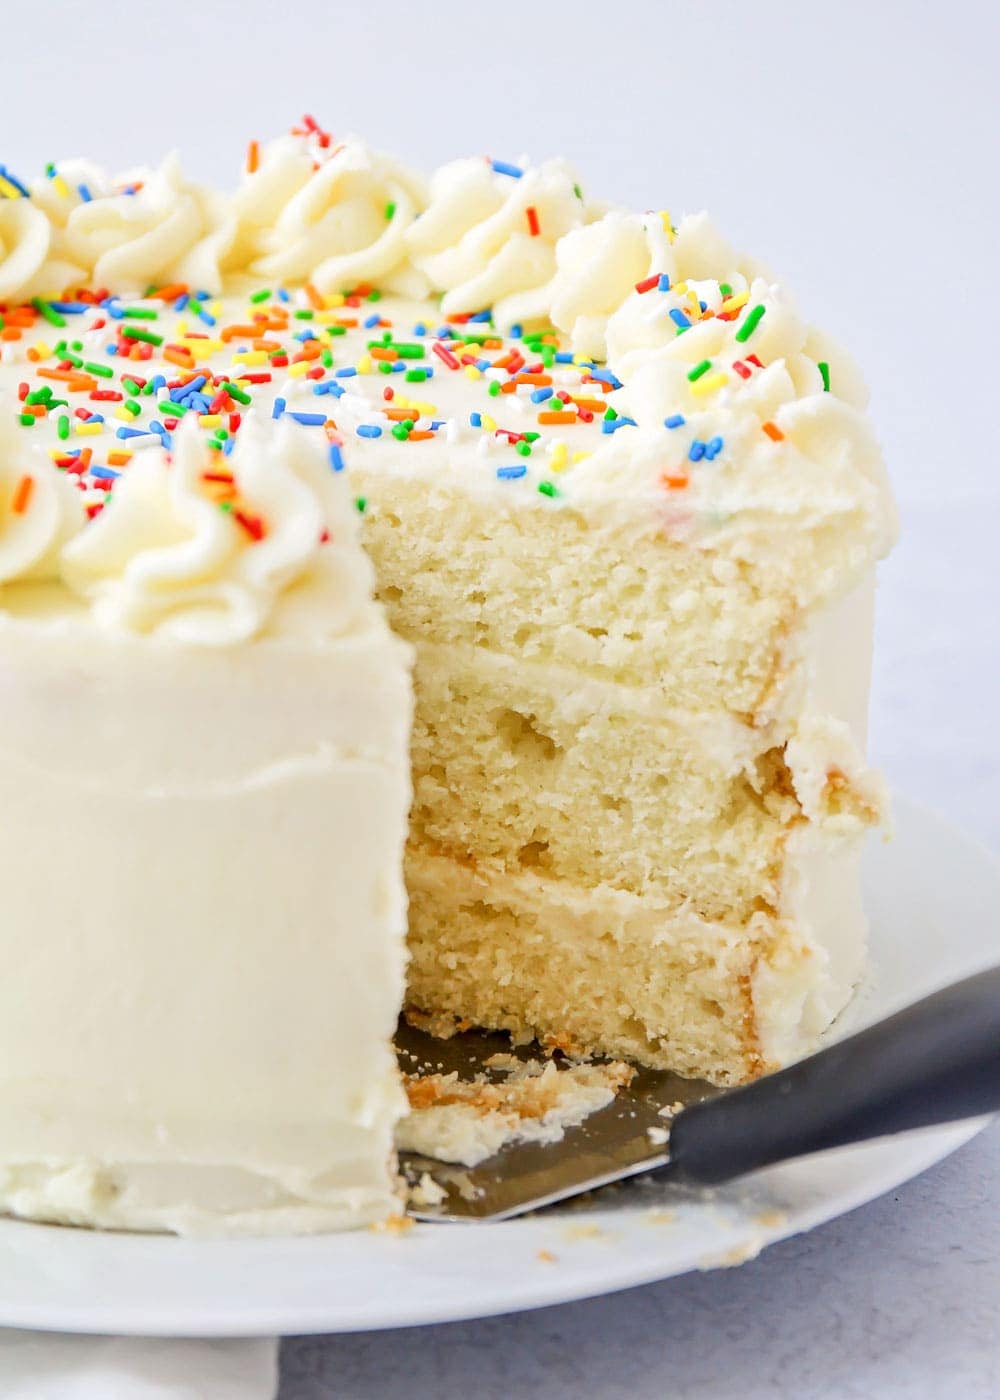 French Vanilla Cake with French Vanilla Buttercream Frosting Recipe